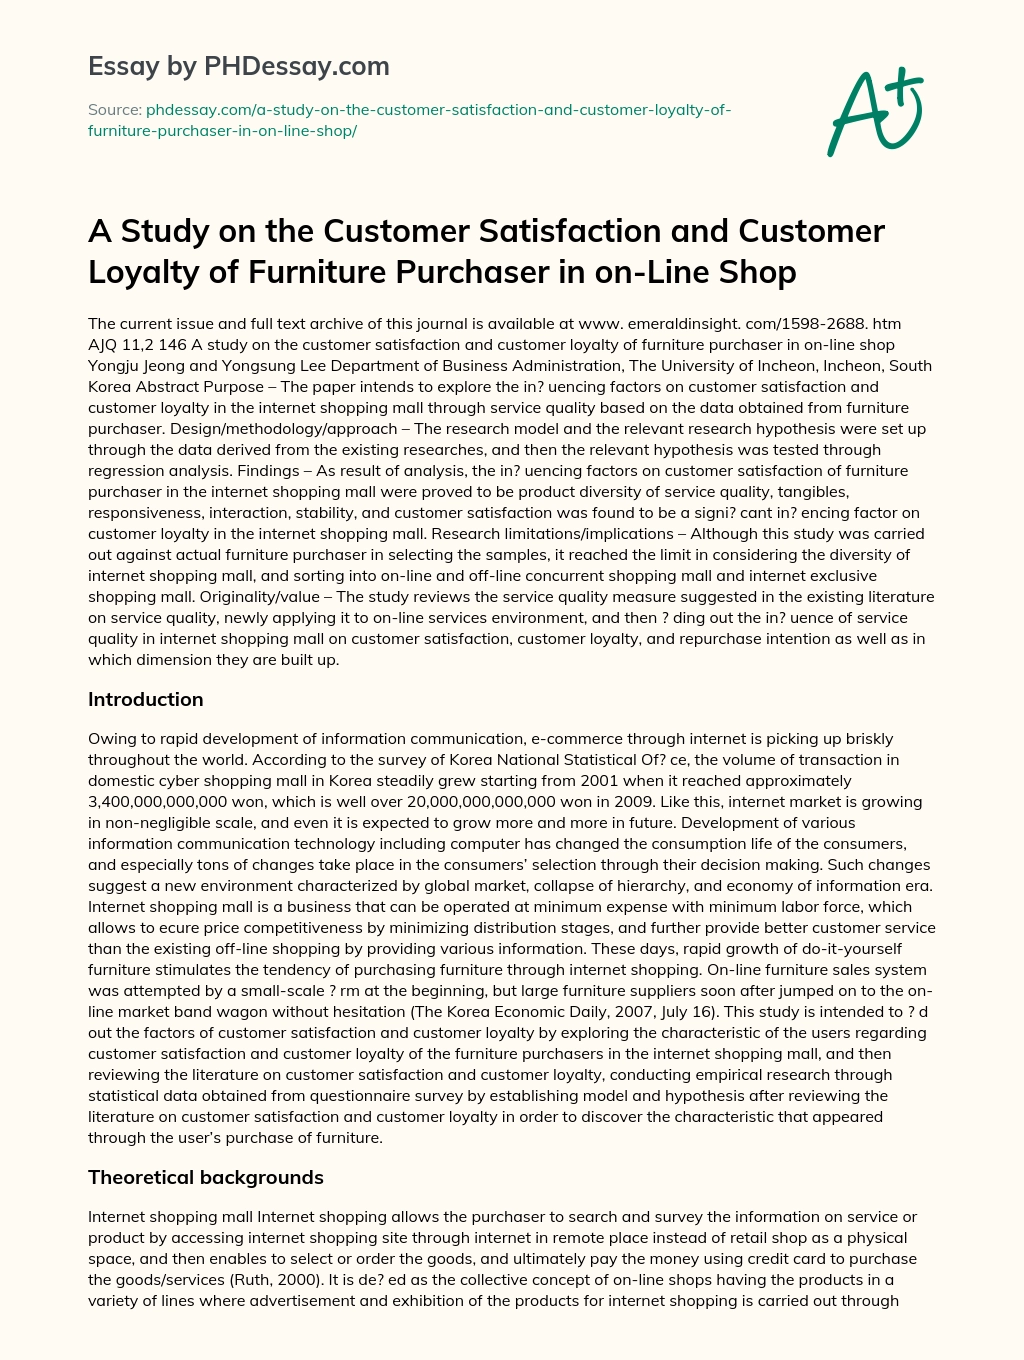 A Study on the Customer Satisfaction and Customer Loyalty of Furniture Purchaser in on-Line Shop essay